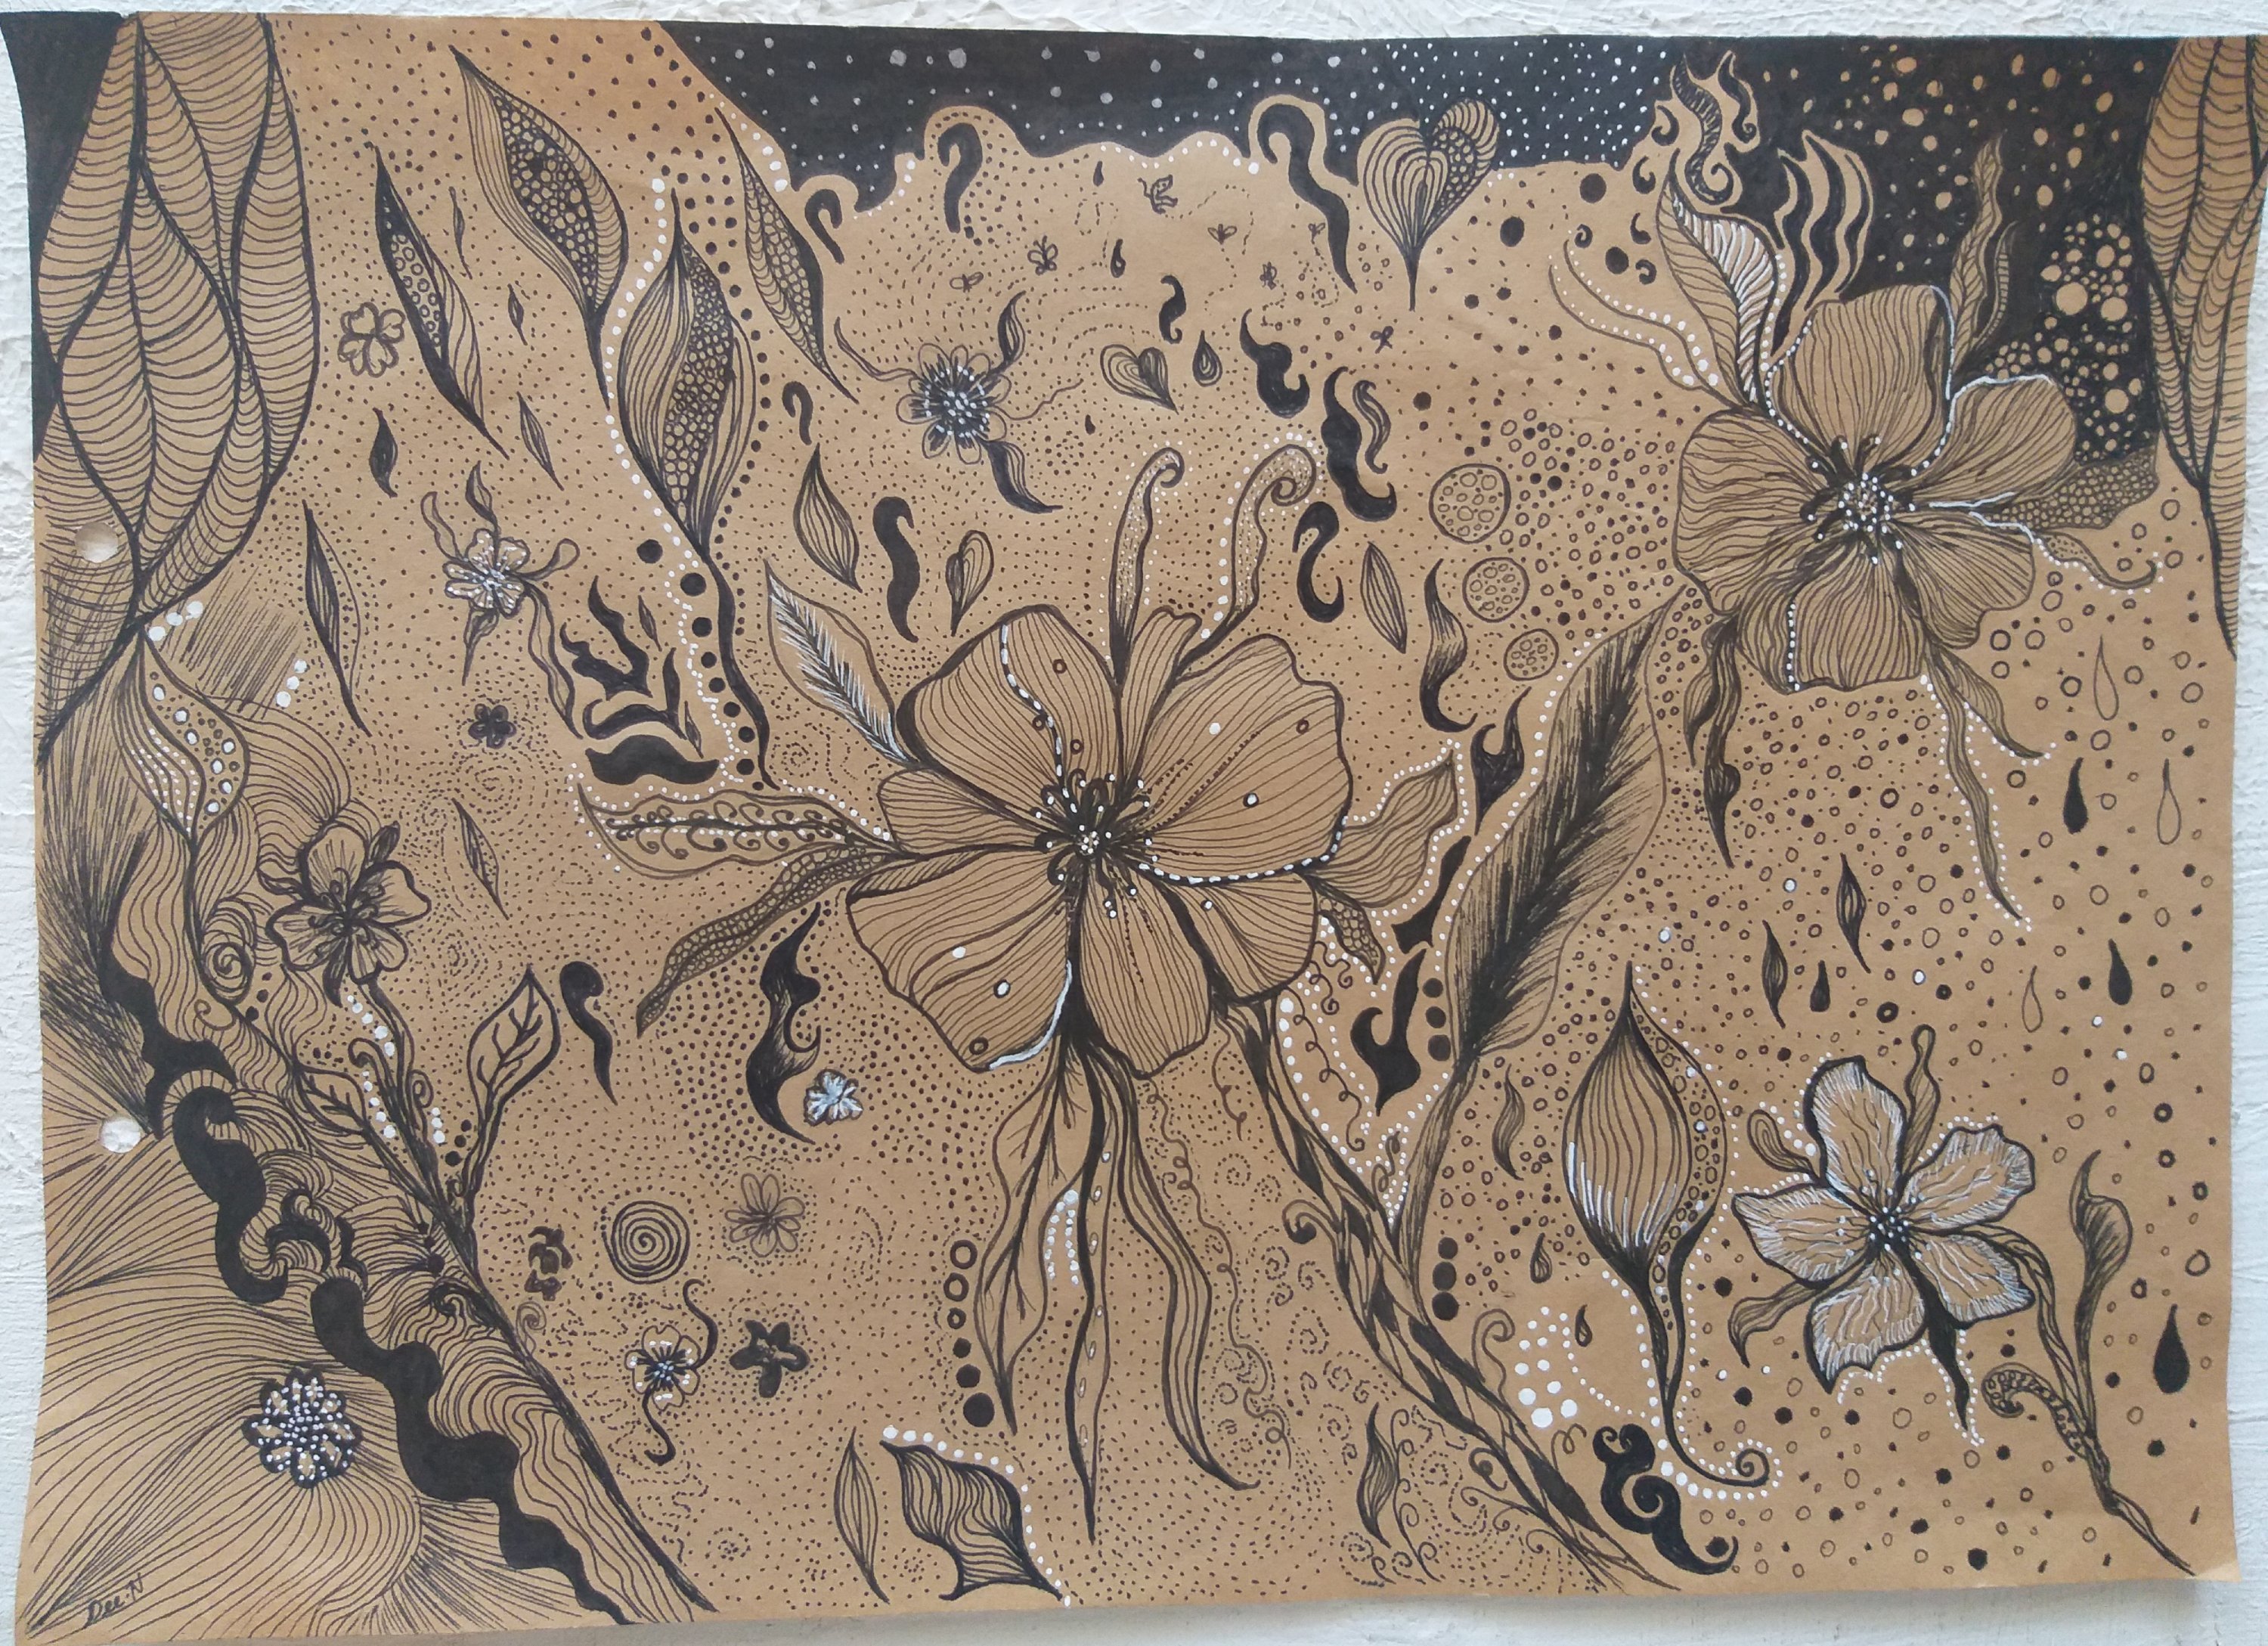 Wild Flowers A3 Drawing - black ink drawing on brown paper